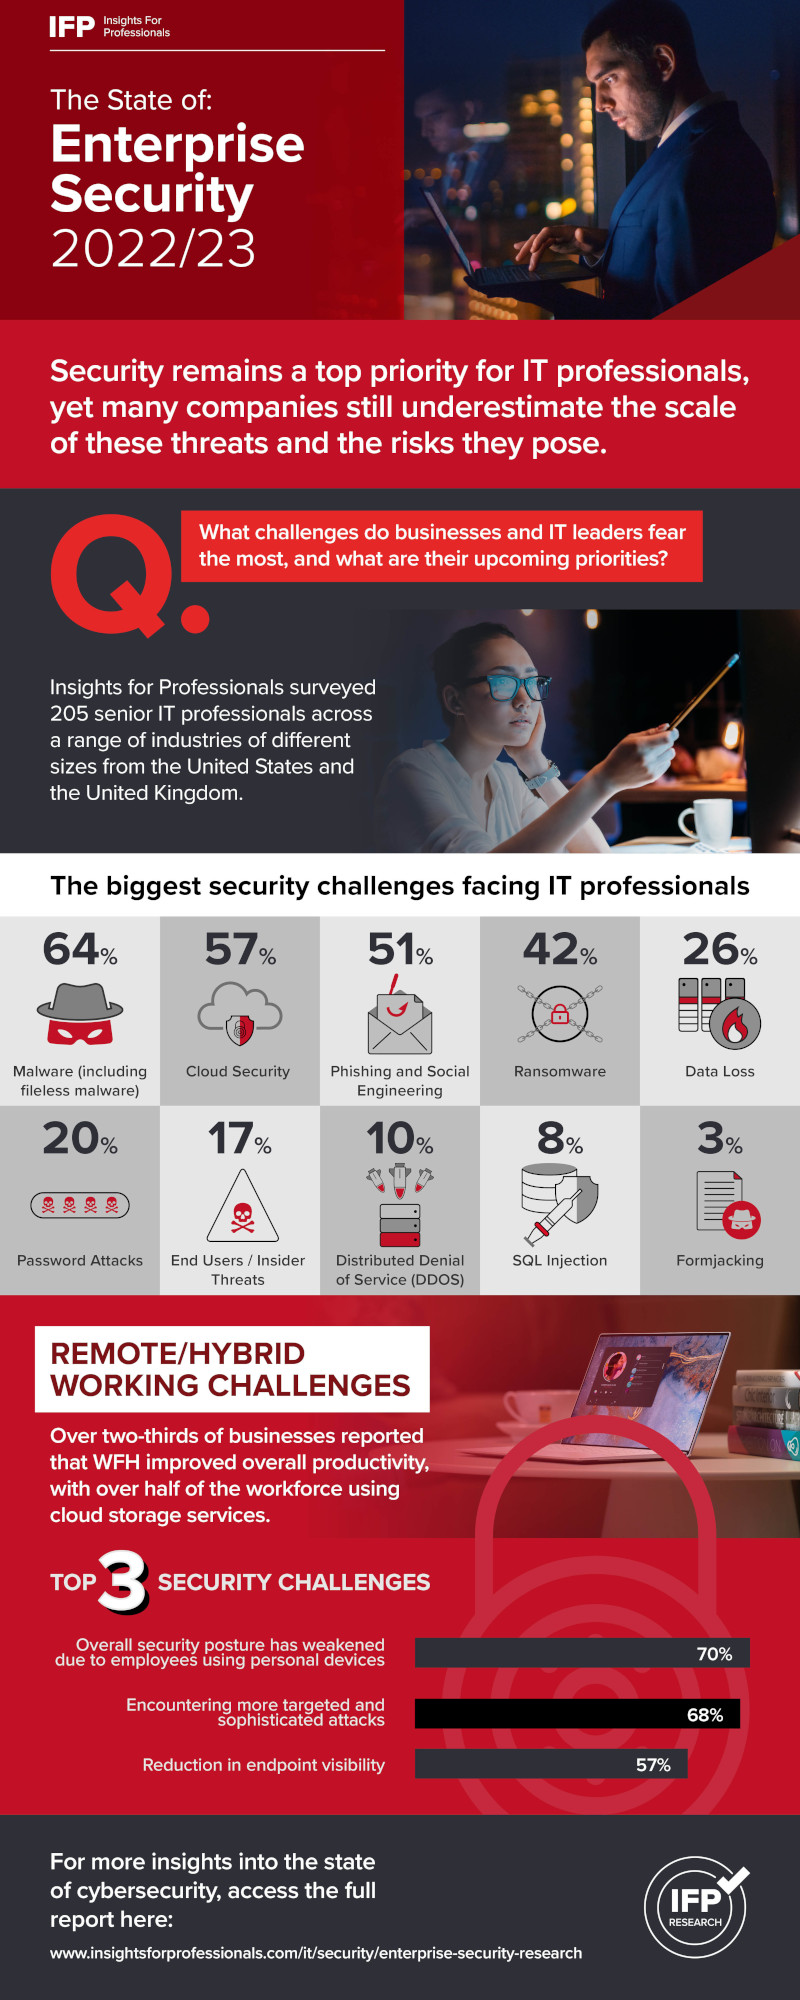 IFP visual with 13 stats on the biggest cybersecurity challenges and the impact of hybrid working